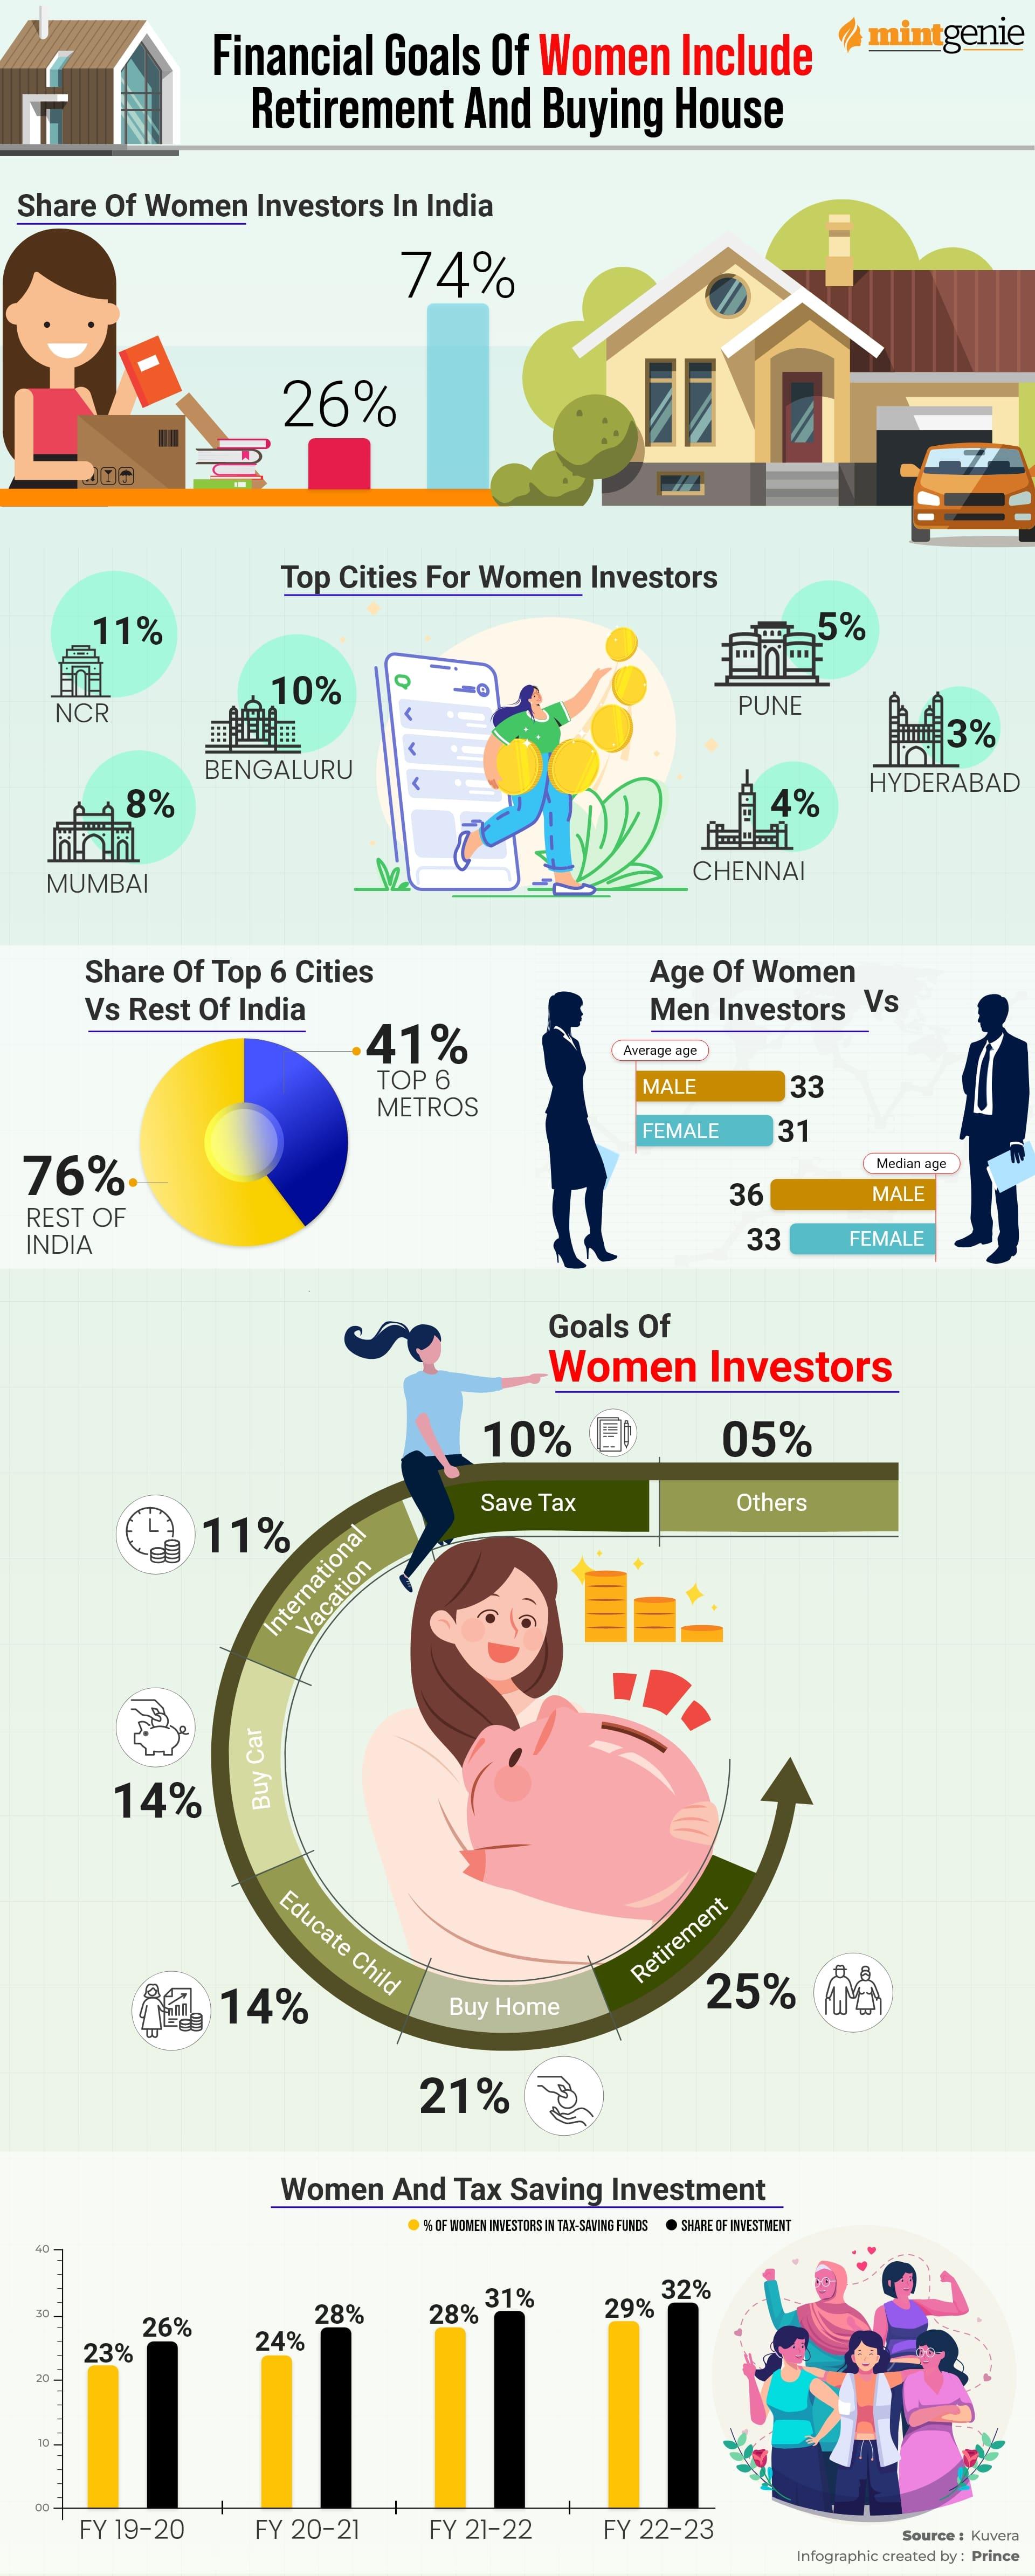 Financial goals of women include retirement and buying house